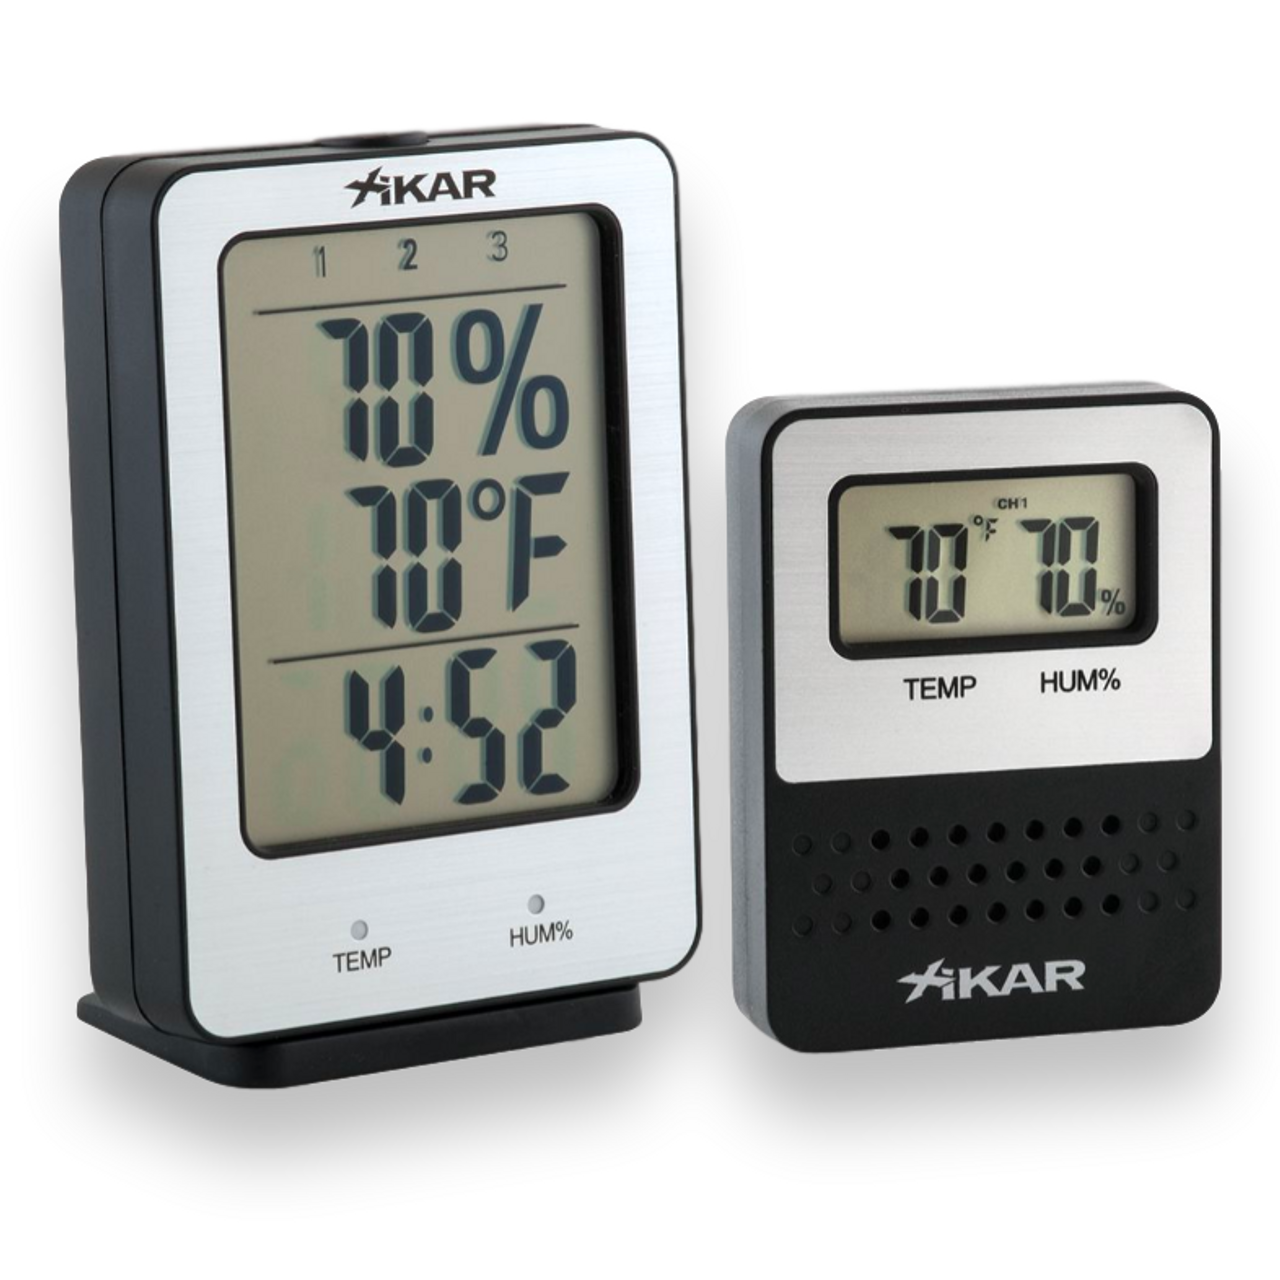 https://cdn11.bigcommerce.com/s-c63ufk/images/stencil/1280x1280/products/1119/6311/Xikar-Purotemp-Wireless-Hygrometer-Base-Unit-with-1-Remote-Sensor--Exterior-Top-1_clipped_rev_1__45020.1600036339.png?c=2